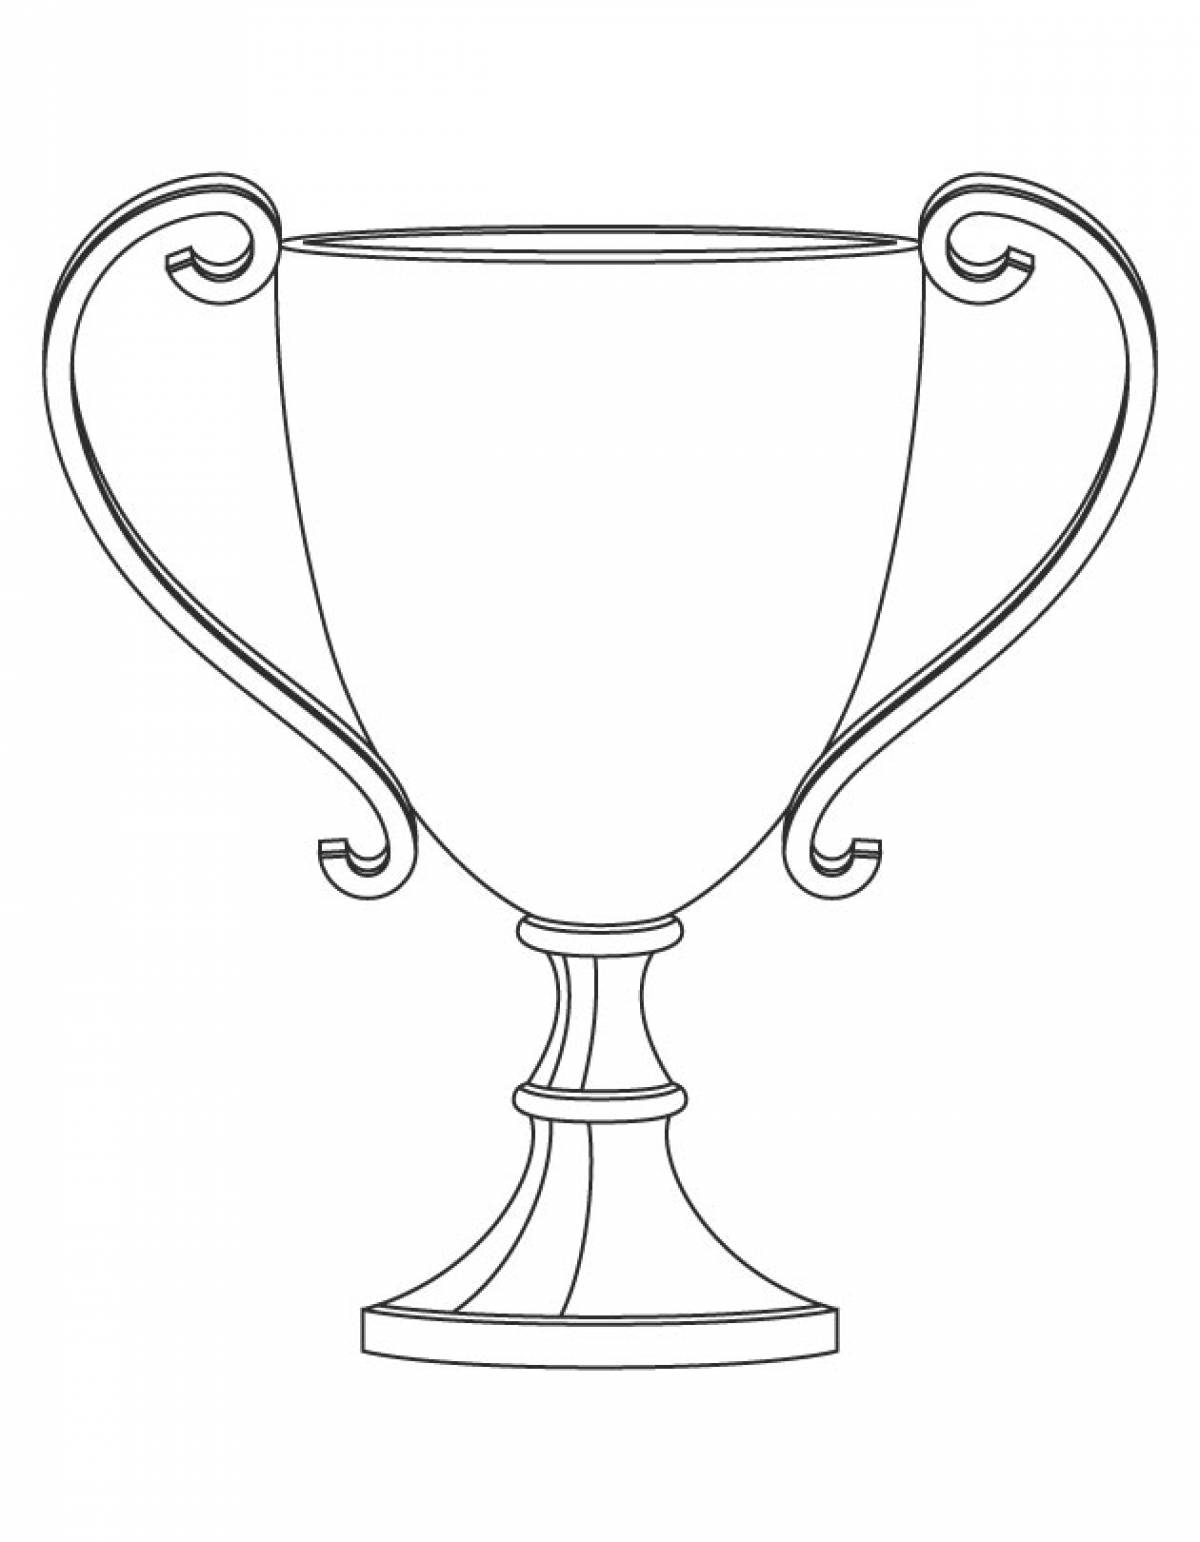 Cup drawing